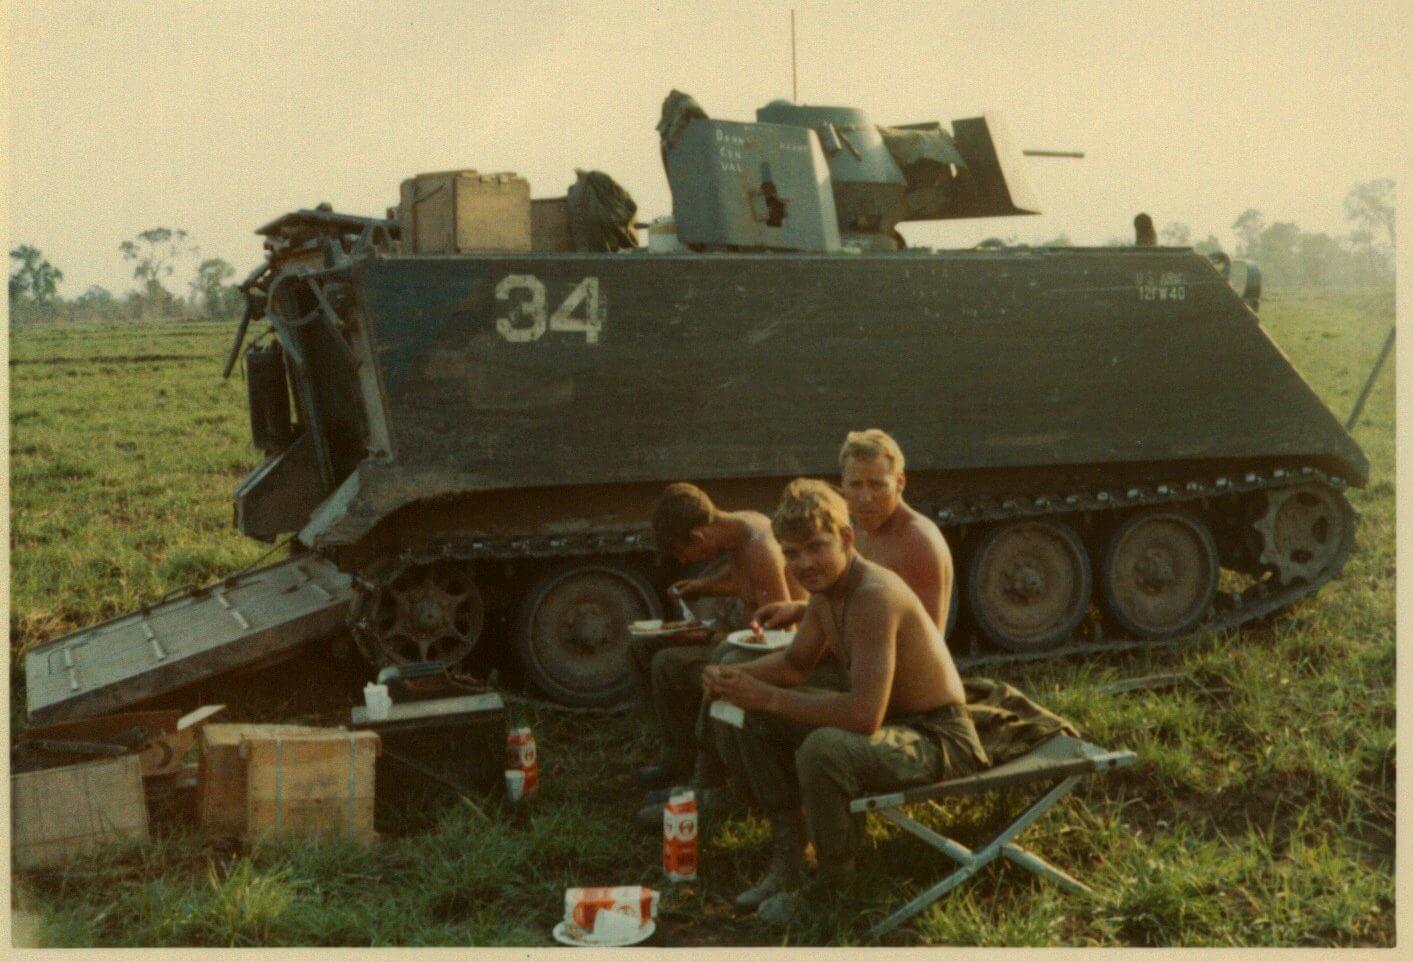 Three soldiers eating alongside a tank, in a field.